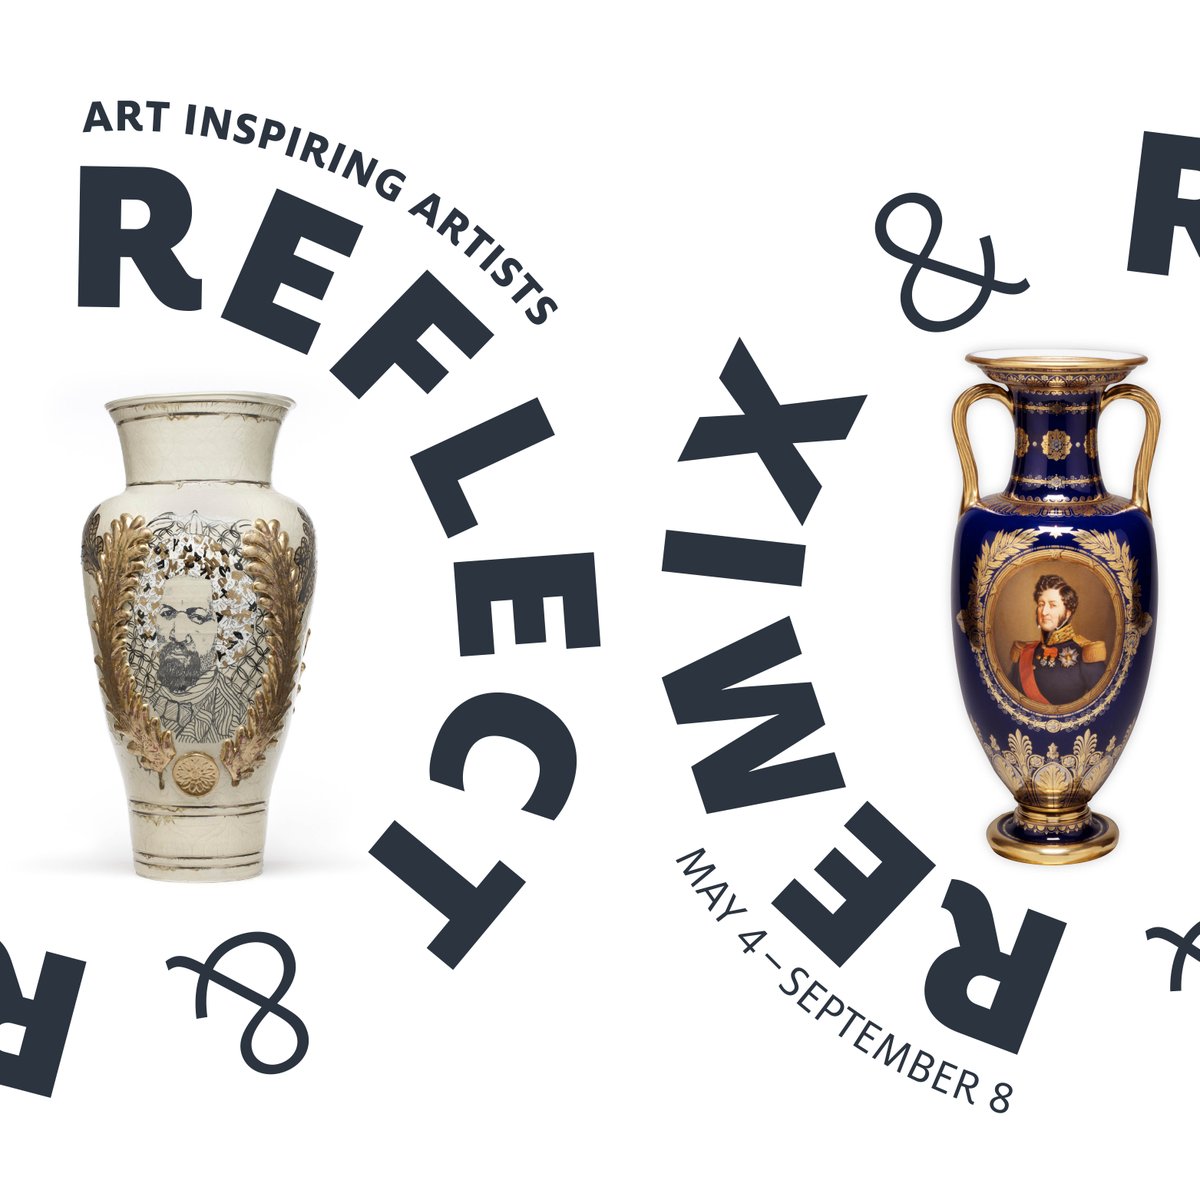 Reflect & Remix: Art Inspiring Artists, now on view ✨ Featuring more than 60 objects from each of the museum’s collection areas, the exhibition includes recent acquisitions as well as many historic pieces which have previously not been on view. bit.ly/3Q8Jz4x